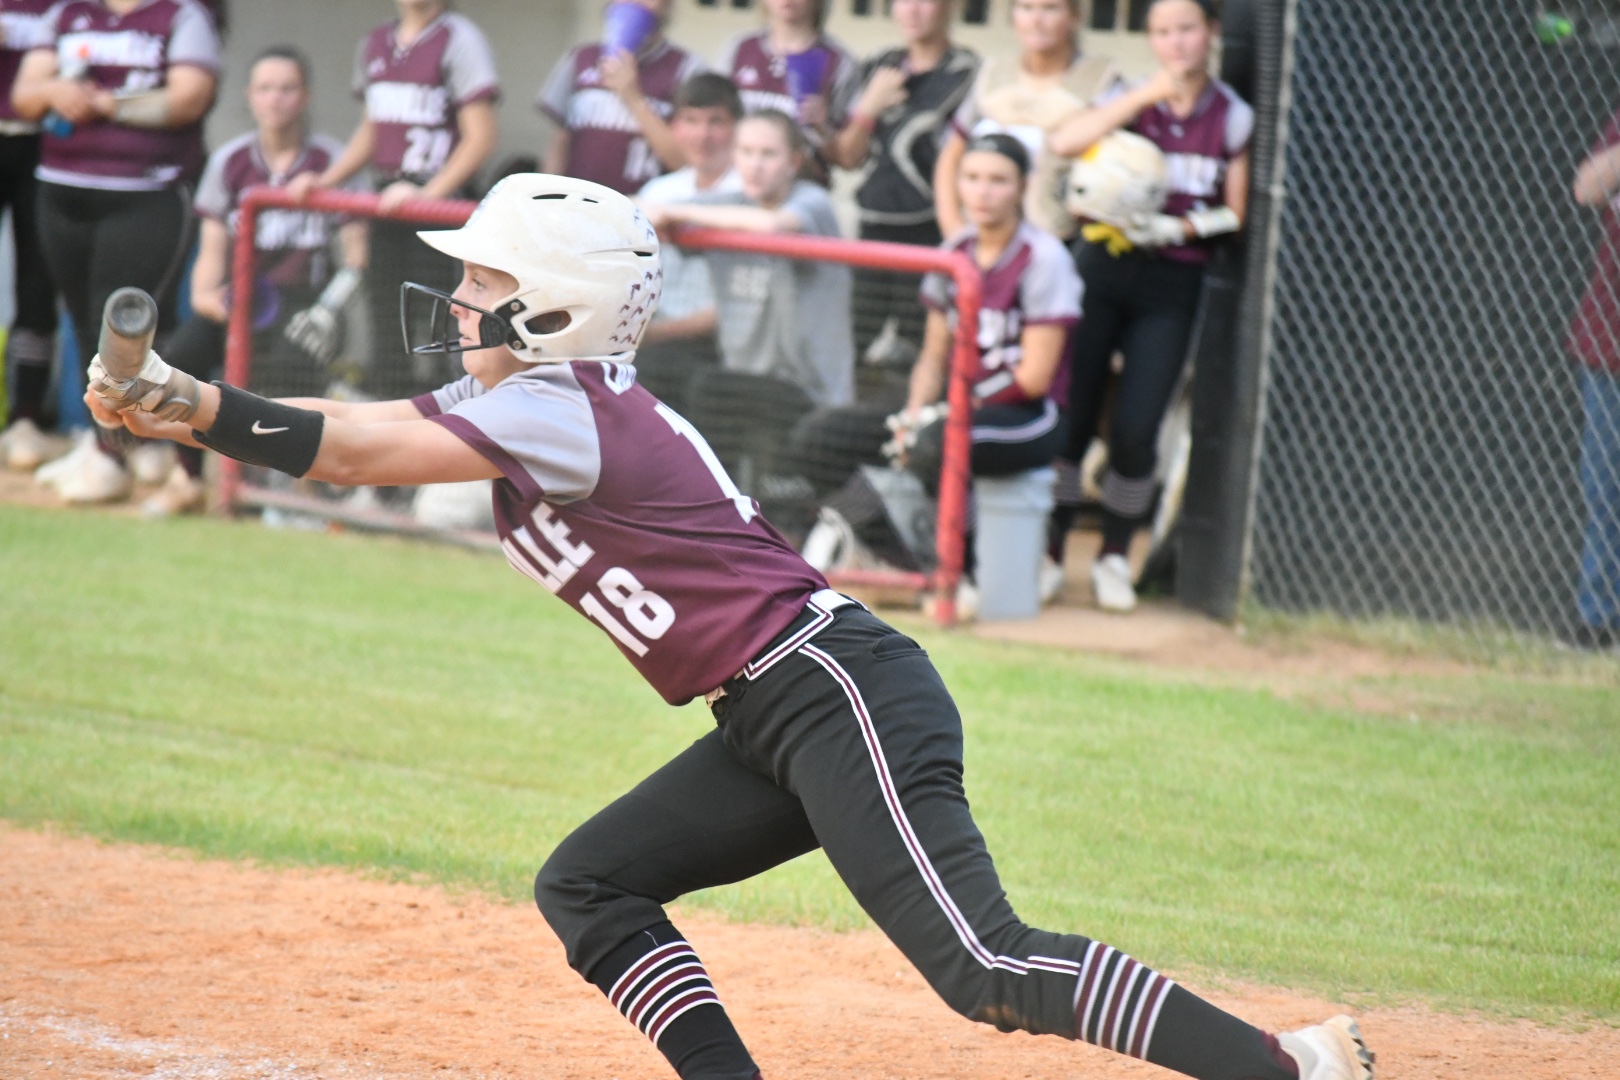 Smithville wins two games on road to advance to North Half championship